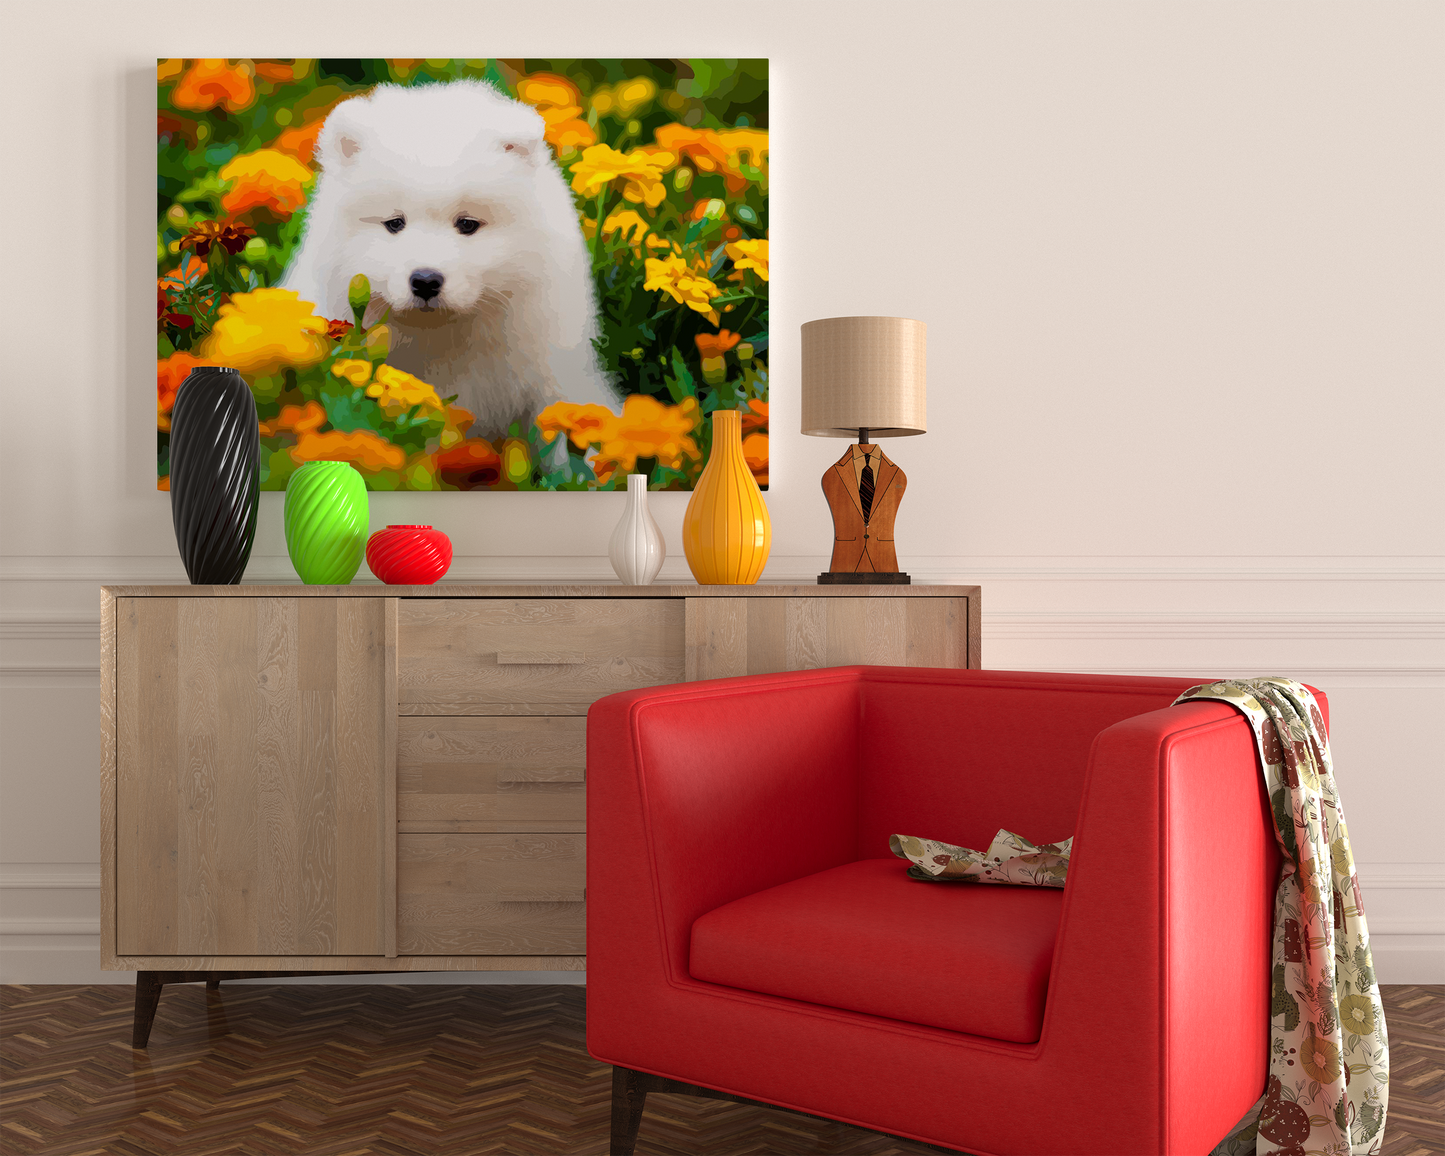 Fluffy White Puppy Paint by Numbers Kit Samoyed